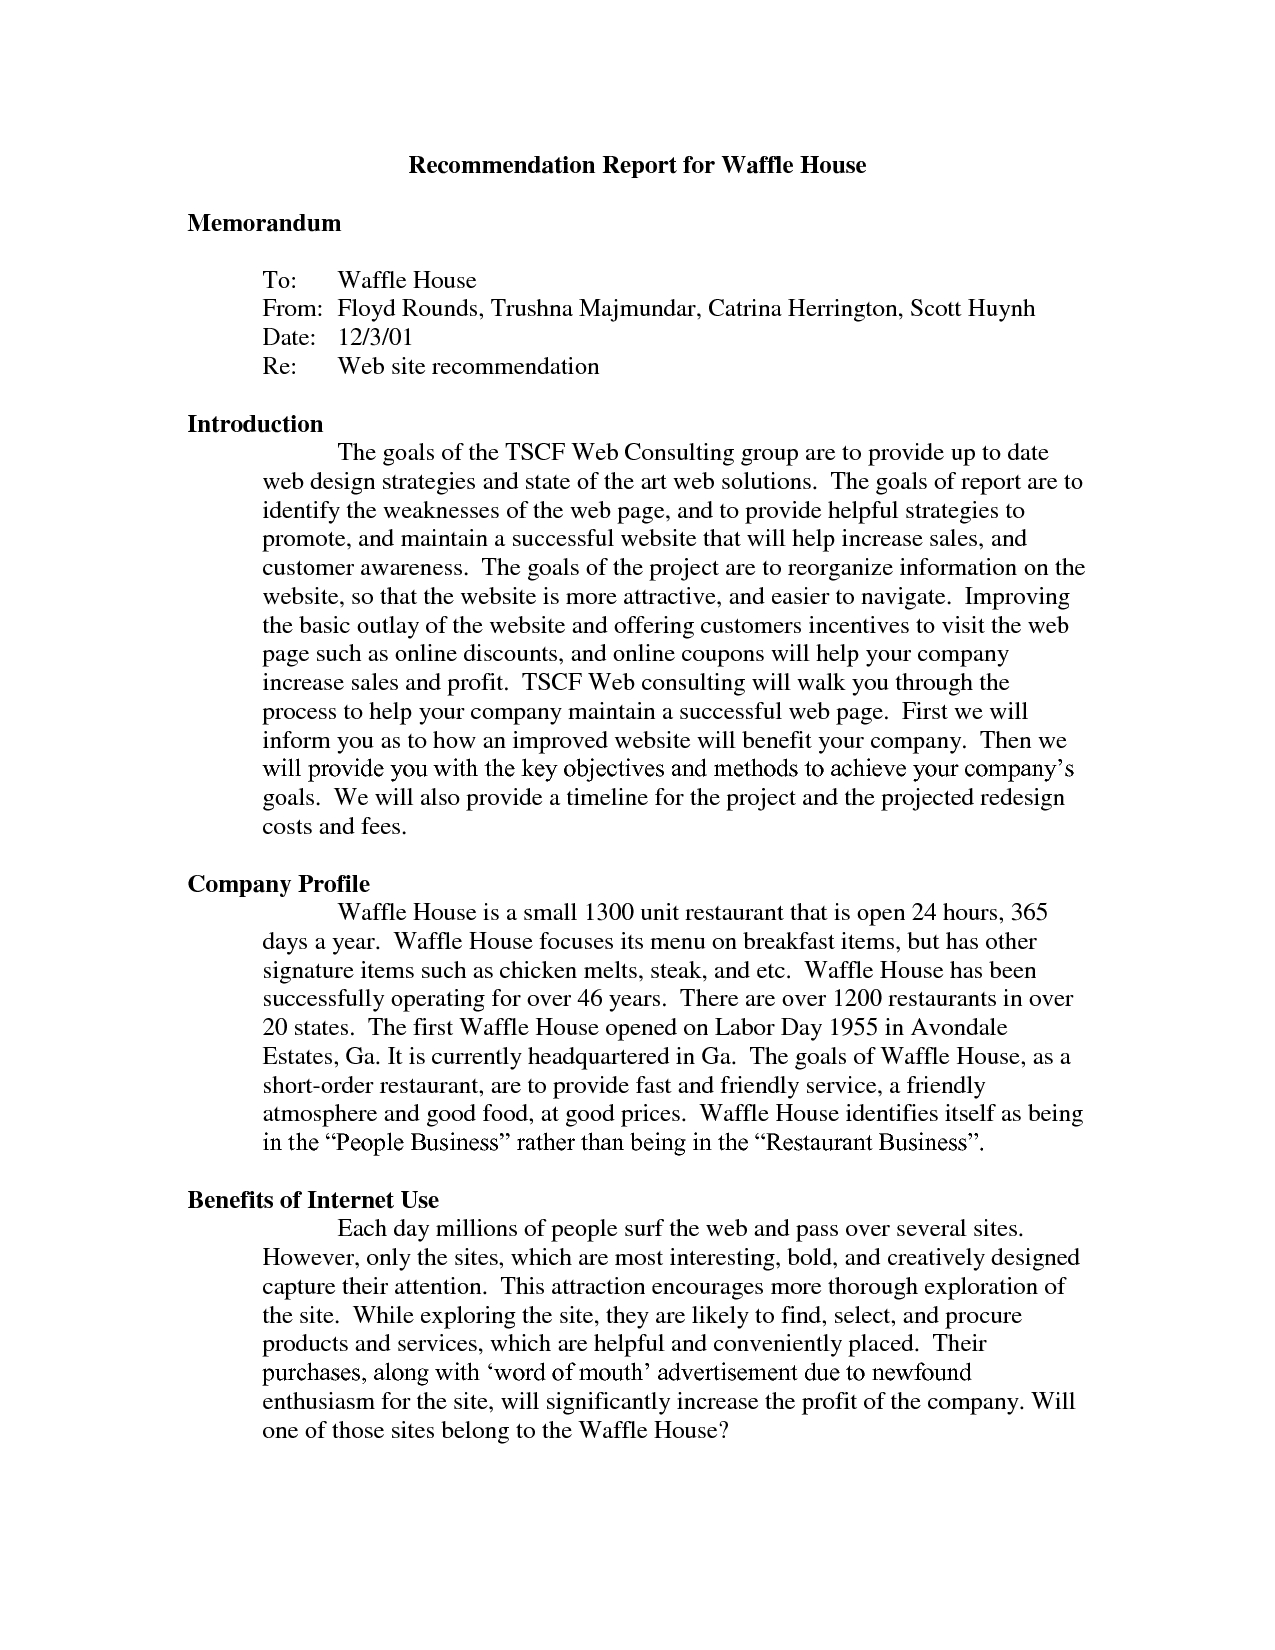 Recommendation Report Sample In Technical Writing Format With Recommendation Report Template